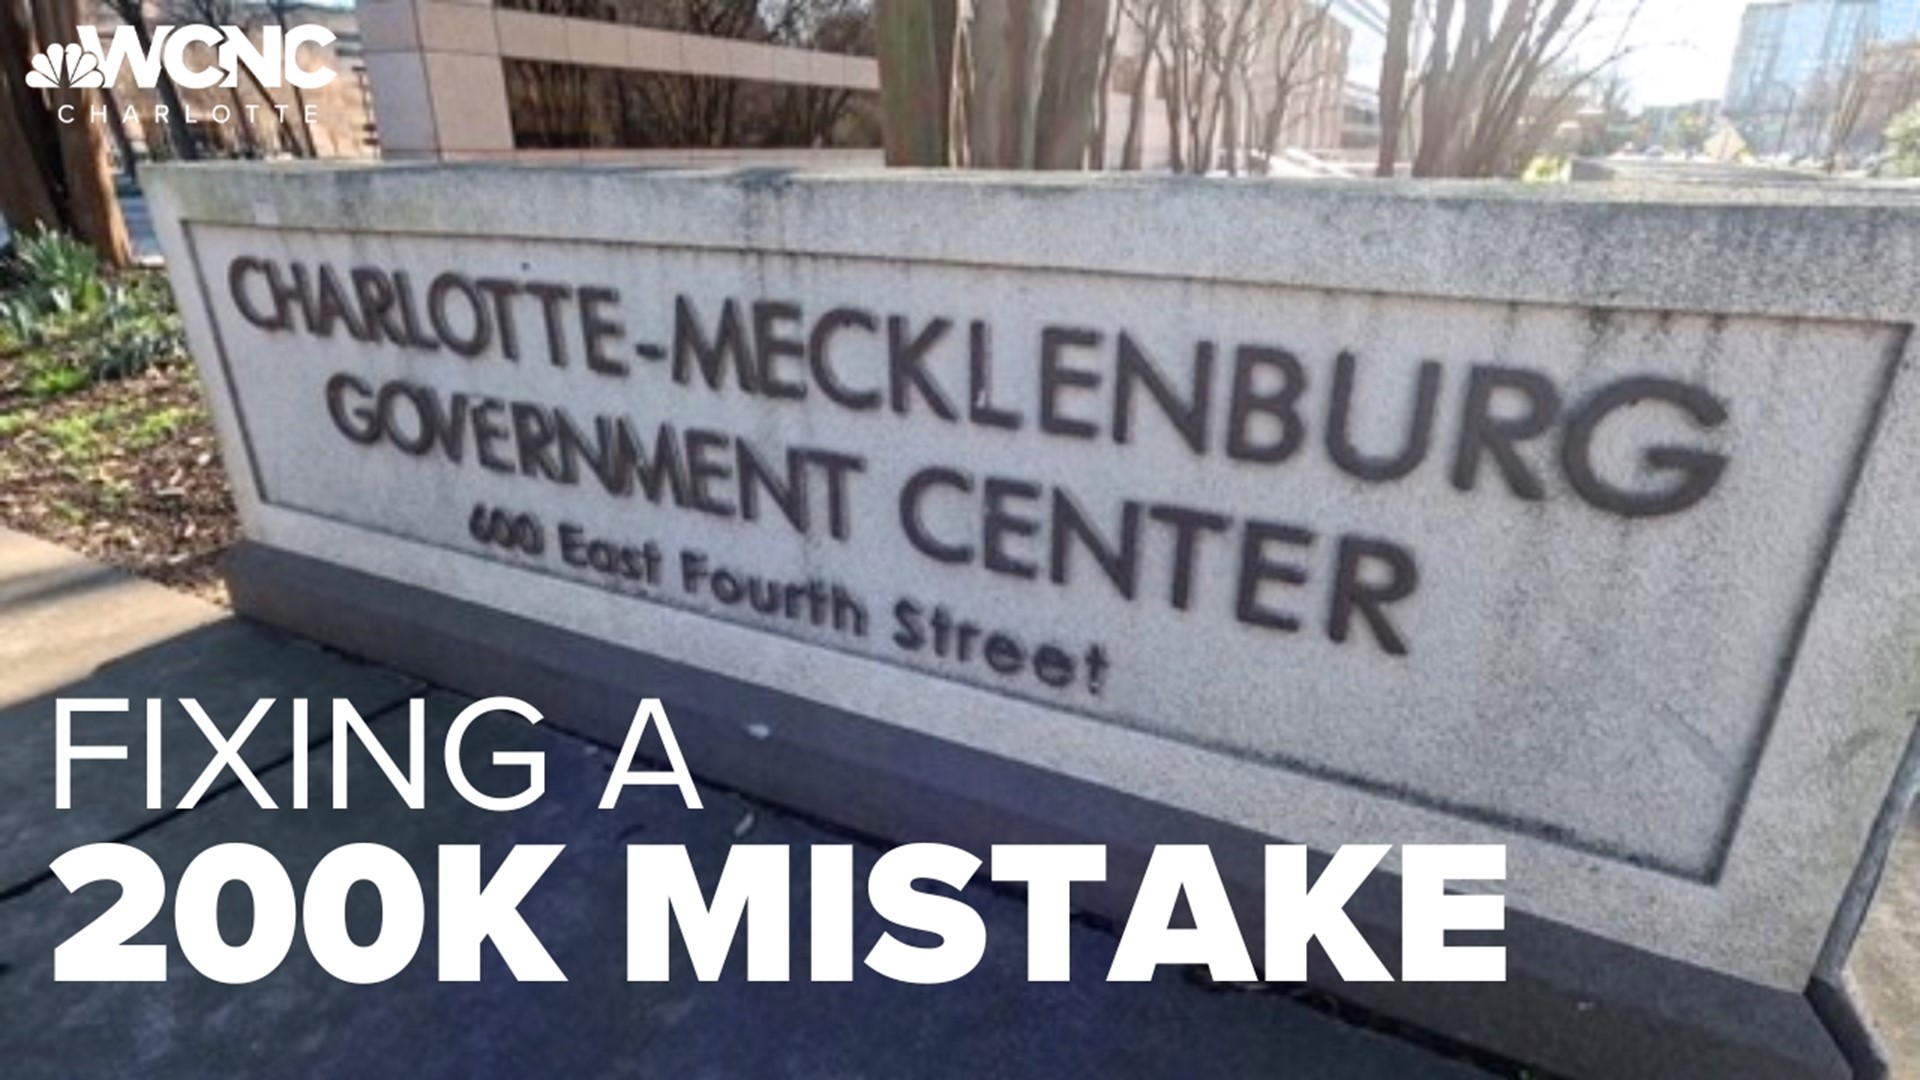 WCNC's Nate Morabito dug to find answers on the city of Charlotte's mistake.